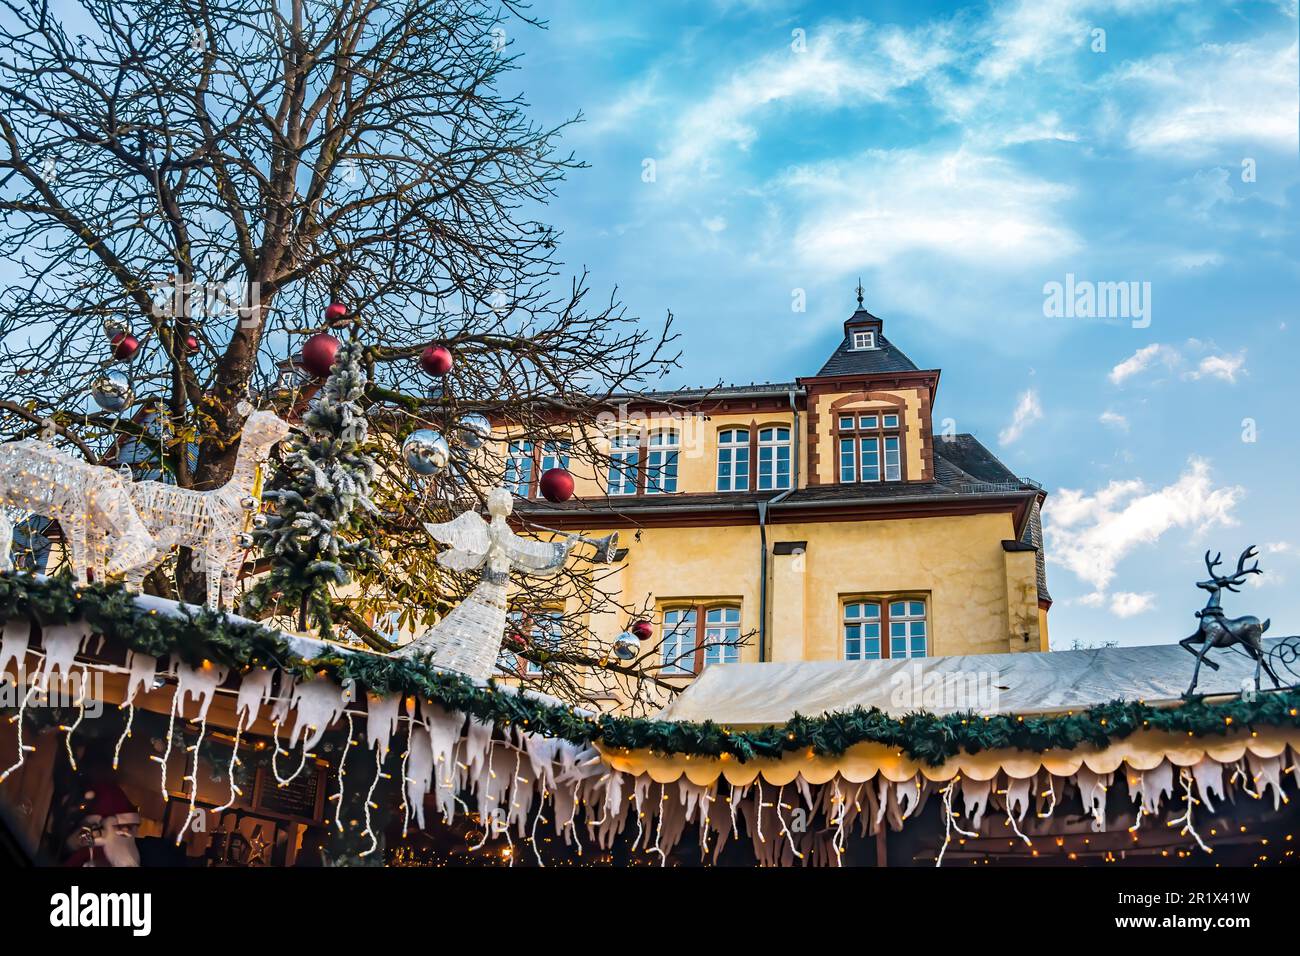 Detail of an idyllically decorated Christmas market in Germany Stock Photo